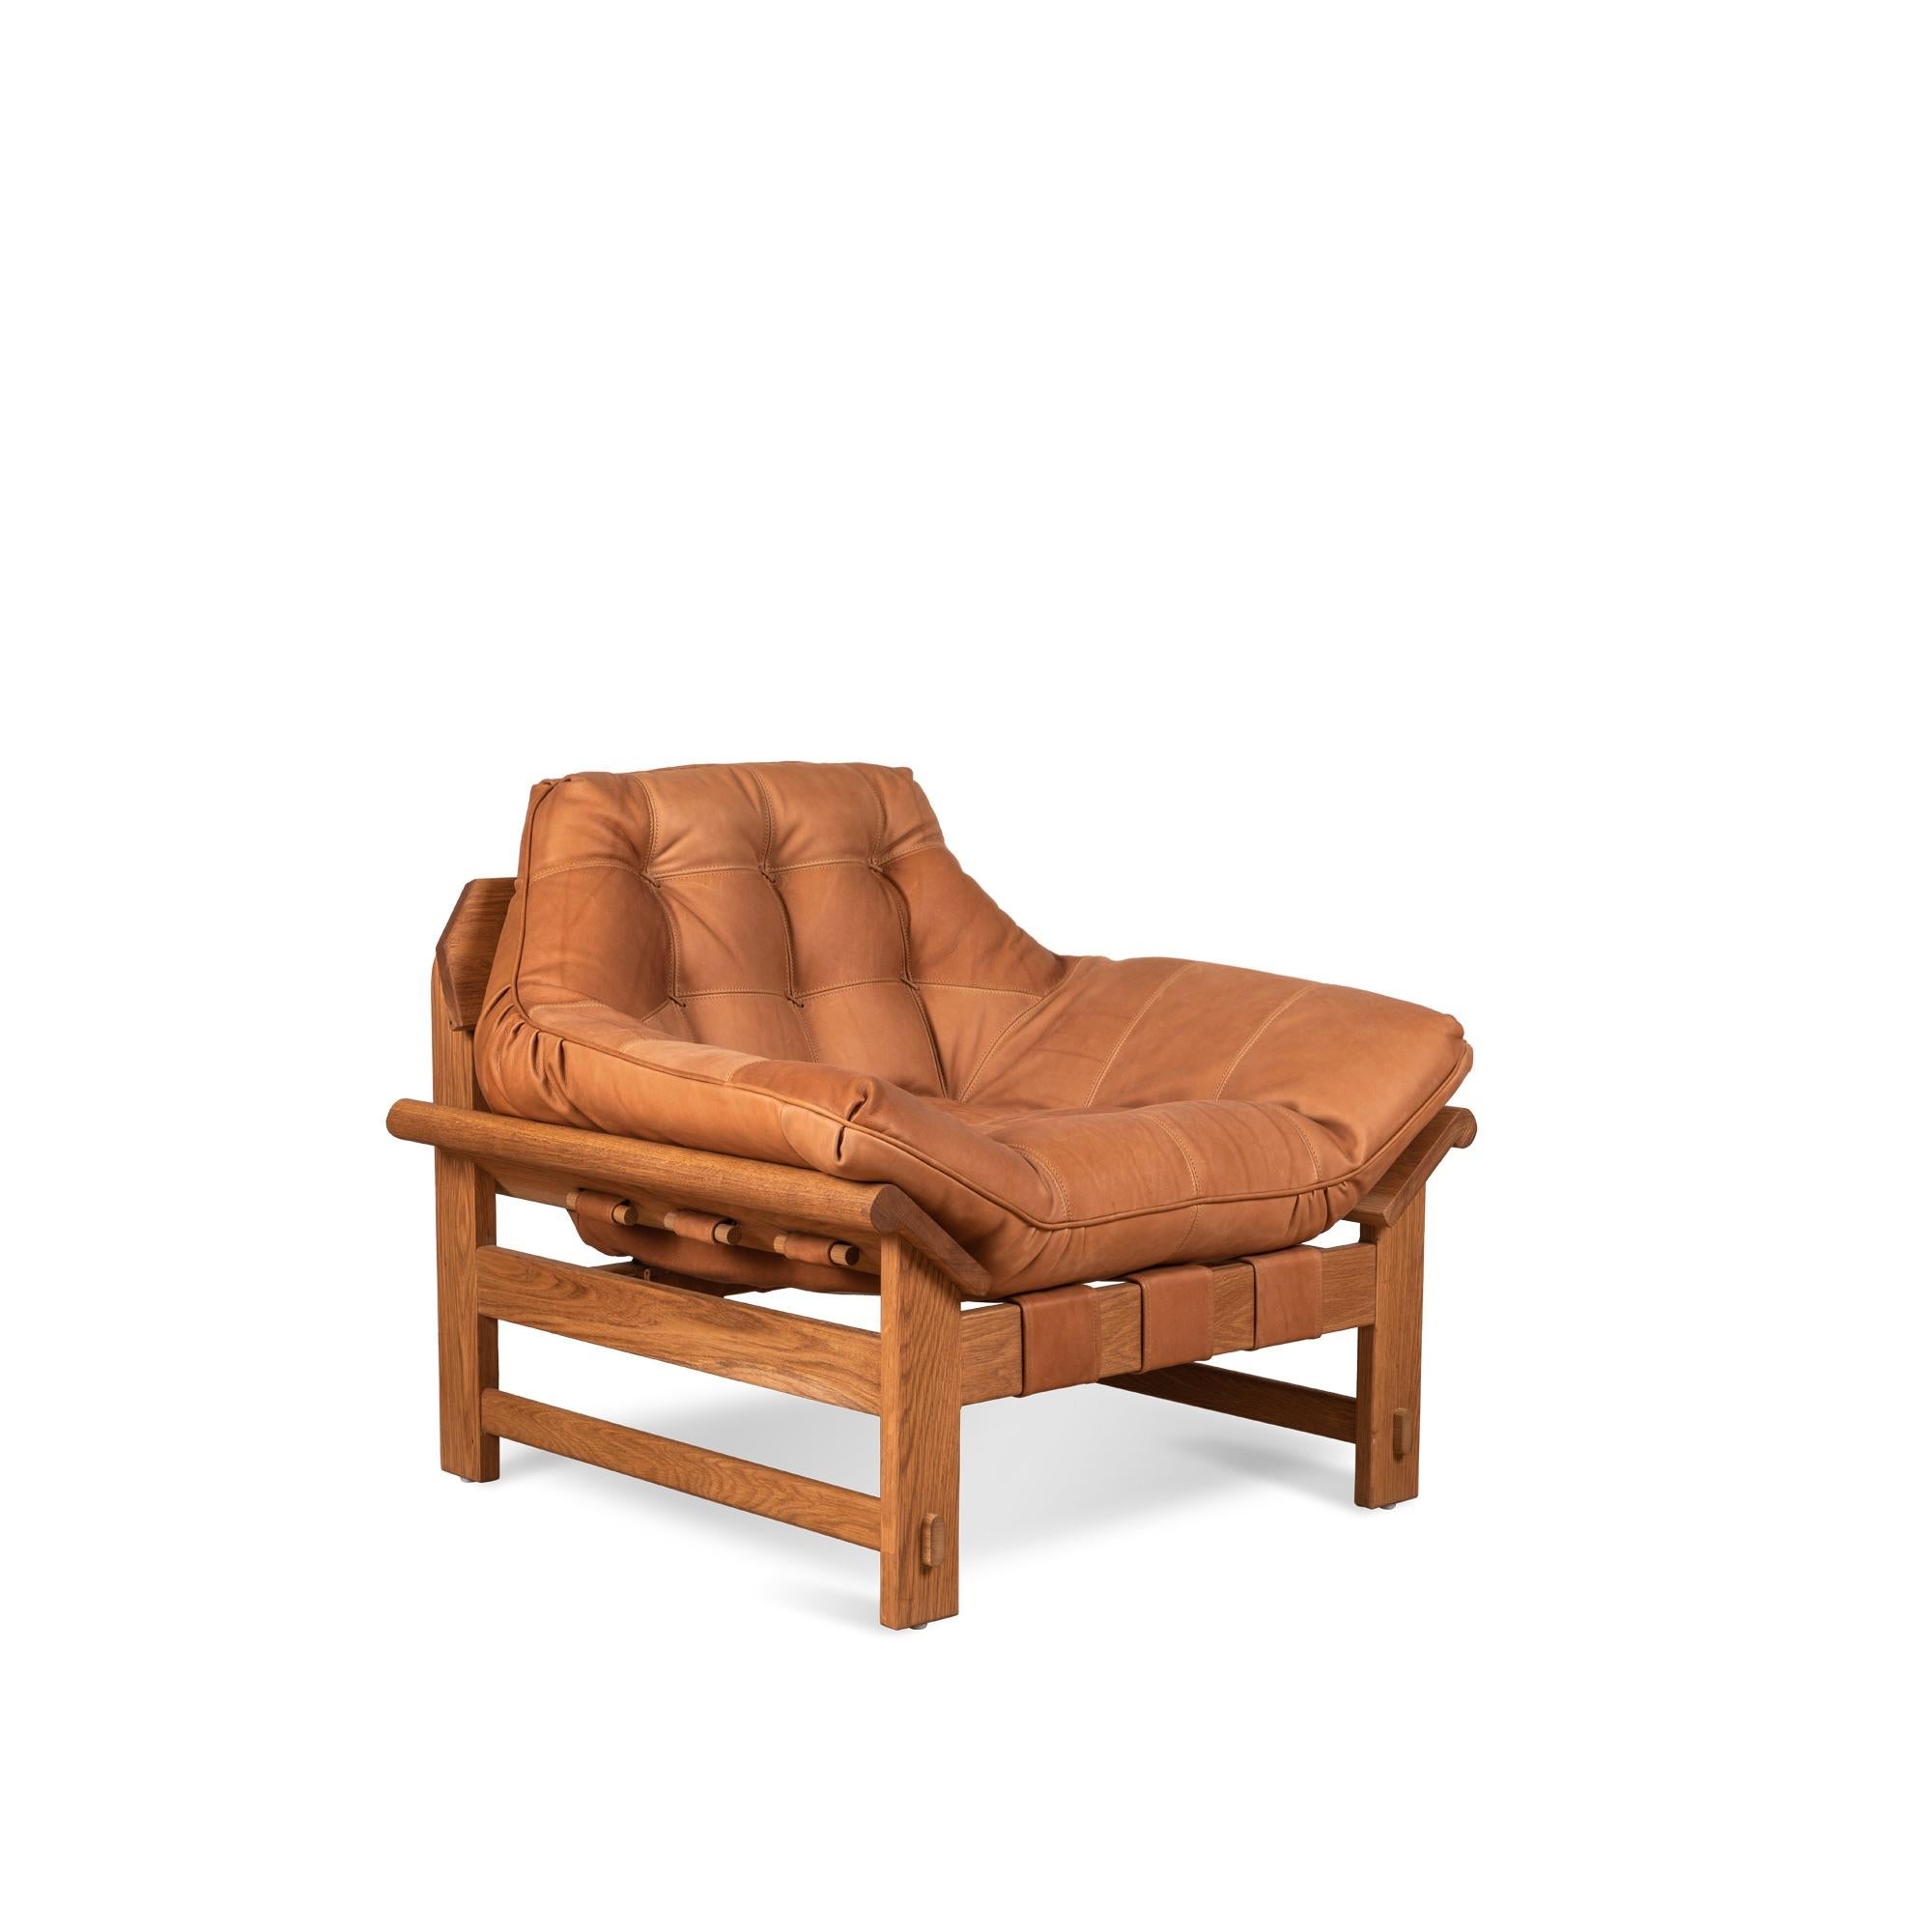 The Ojai lounge chair features a solid white oak or solid walnut base and a single tufted leather cushion with leather straps. Shown here in deer tan leather and oiled oak.

The Lawson-Fenning Collection is designed and handmade in Los Angeles,